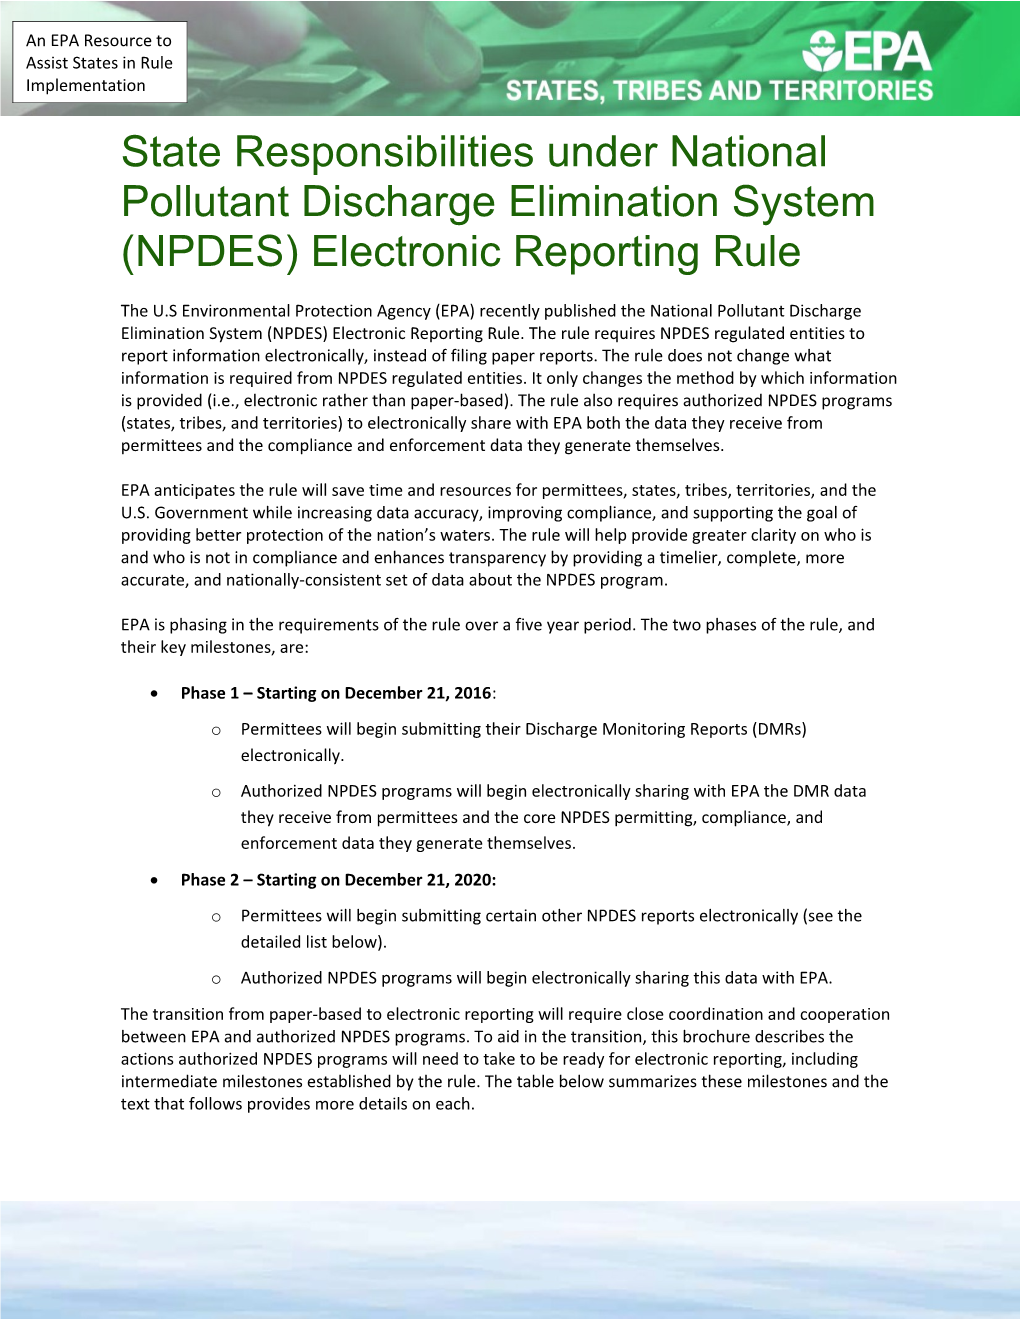 State Responsibilities Under National Pollutant Discharge Elimination System (NPDES) Electronic